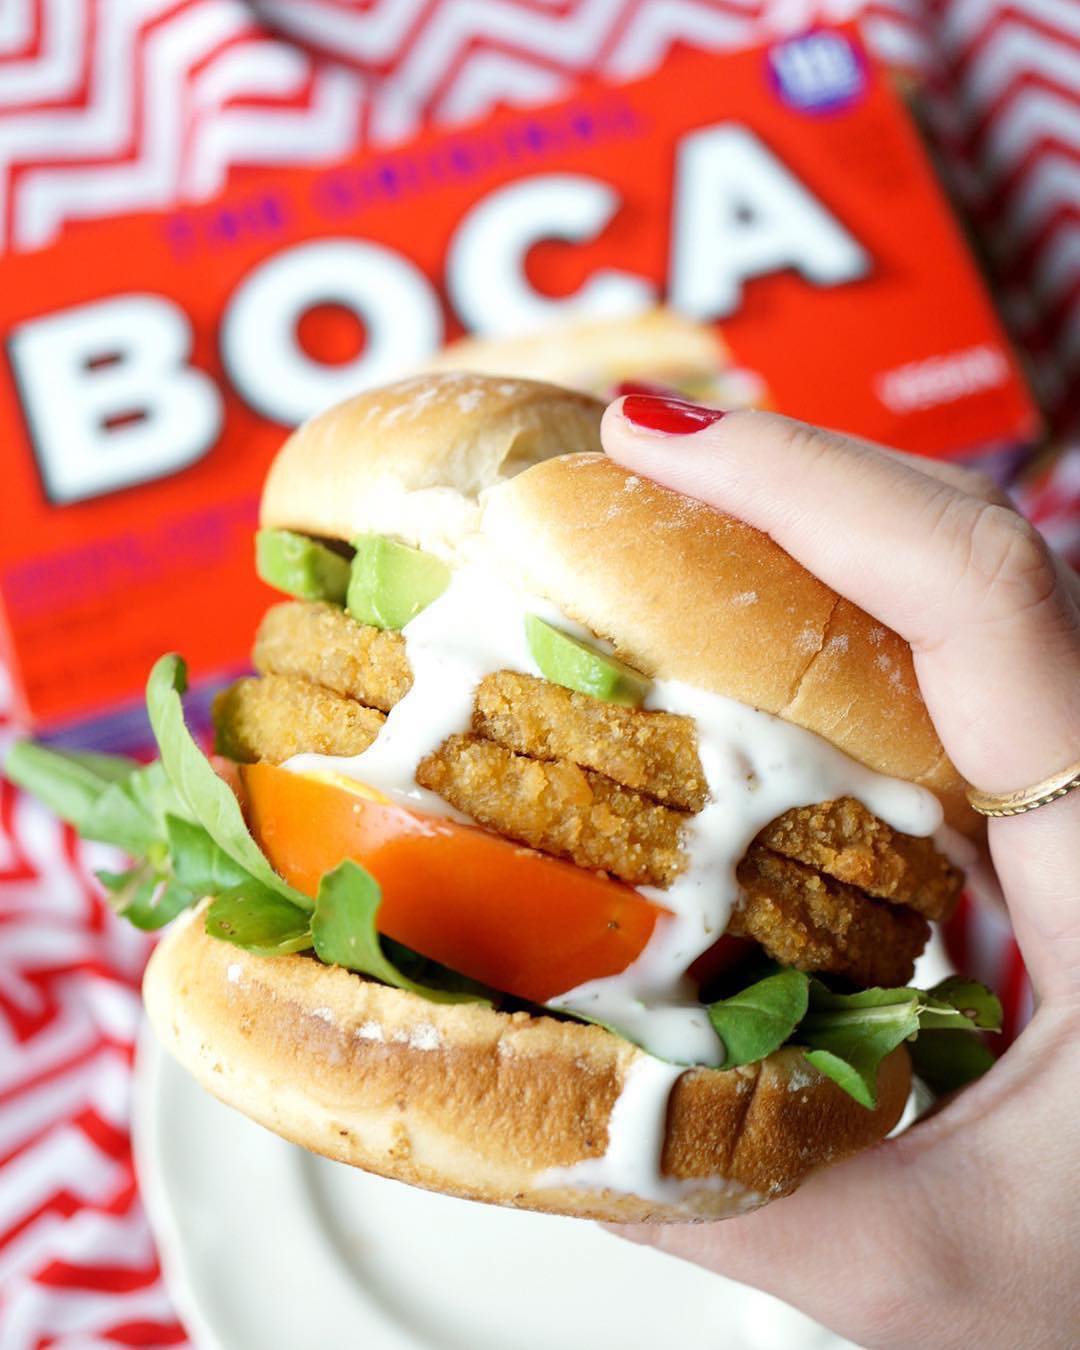 BOCA packaging with chick'n sandwich